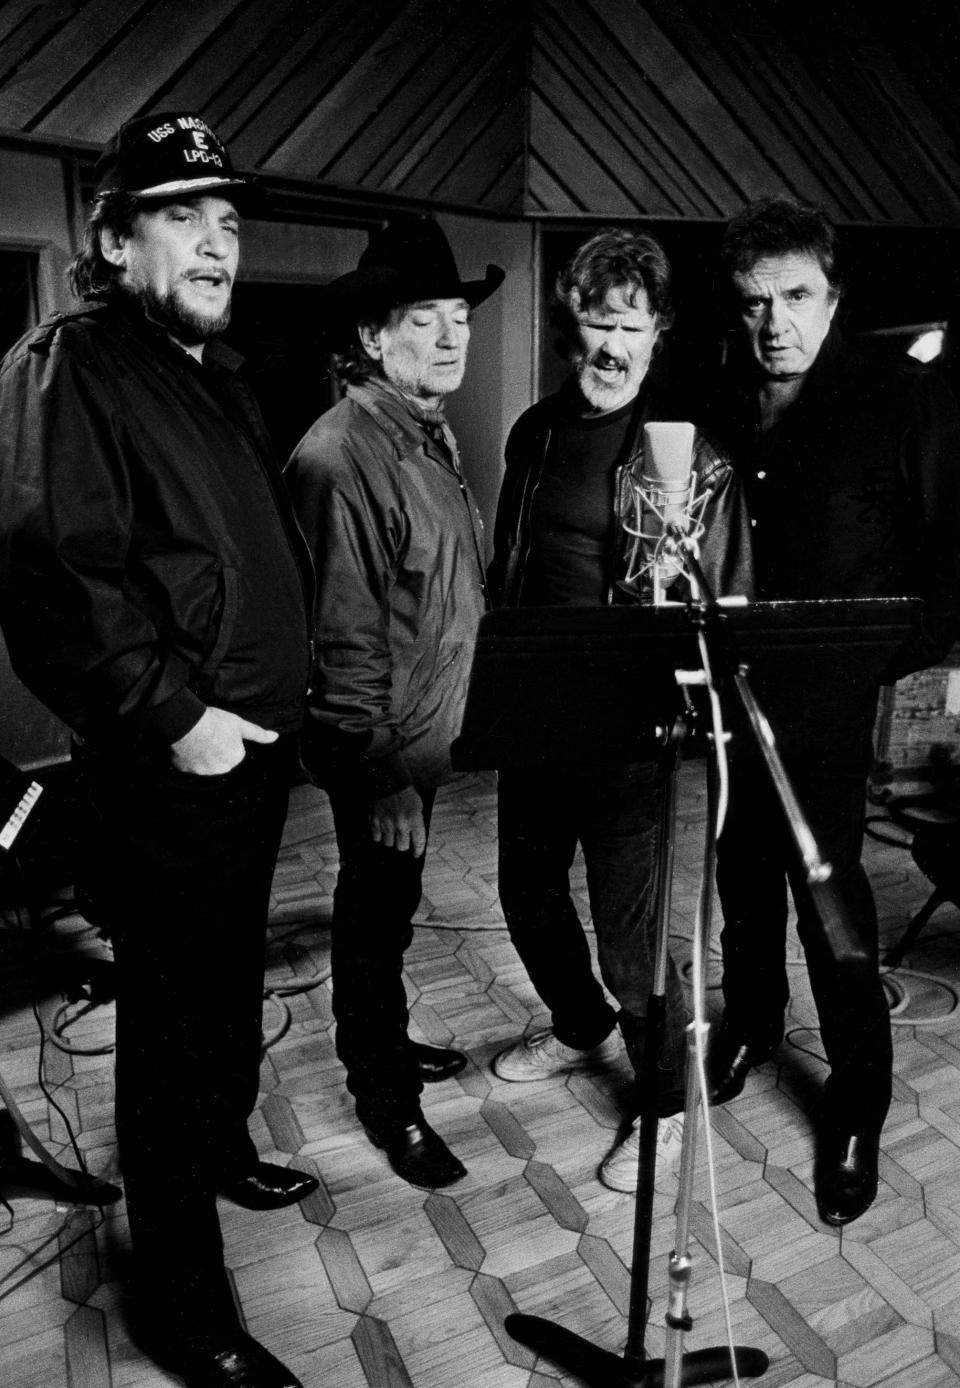 Four of country music's biggest superstars are picking up where they left off with a smash hit four year ago. "The Highwayman 2" co-stars Waylon Jennings, left, Willie Nelson, Kris Kristofferson and Johnny Cash are recording on their second collaborative LP at Emerald Sound studio on Music Row March 8, 1989. One of their biggest hits is "Highwayman."